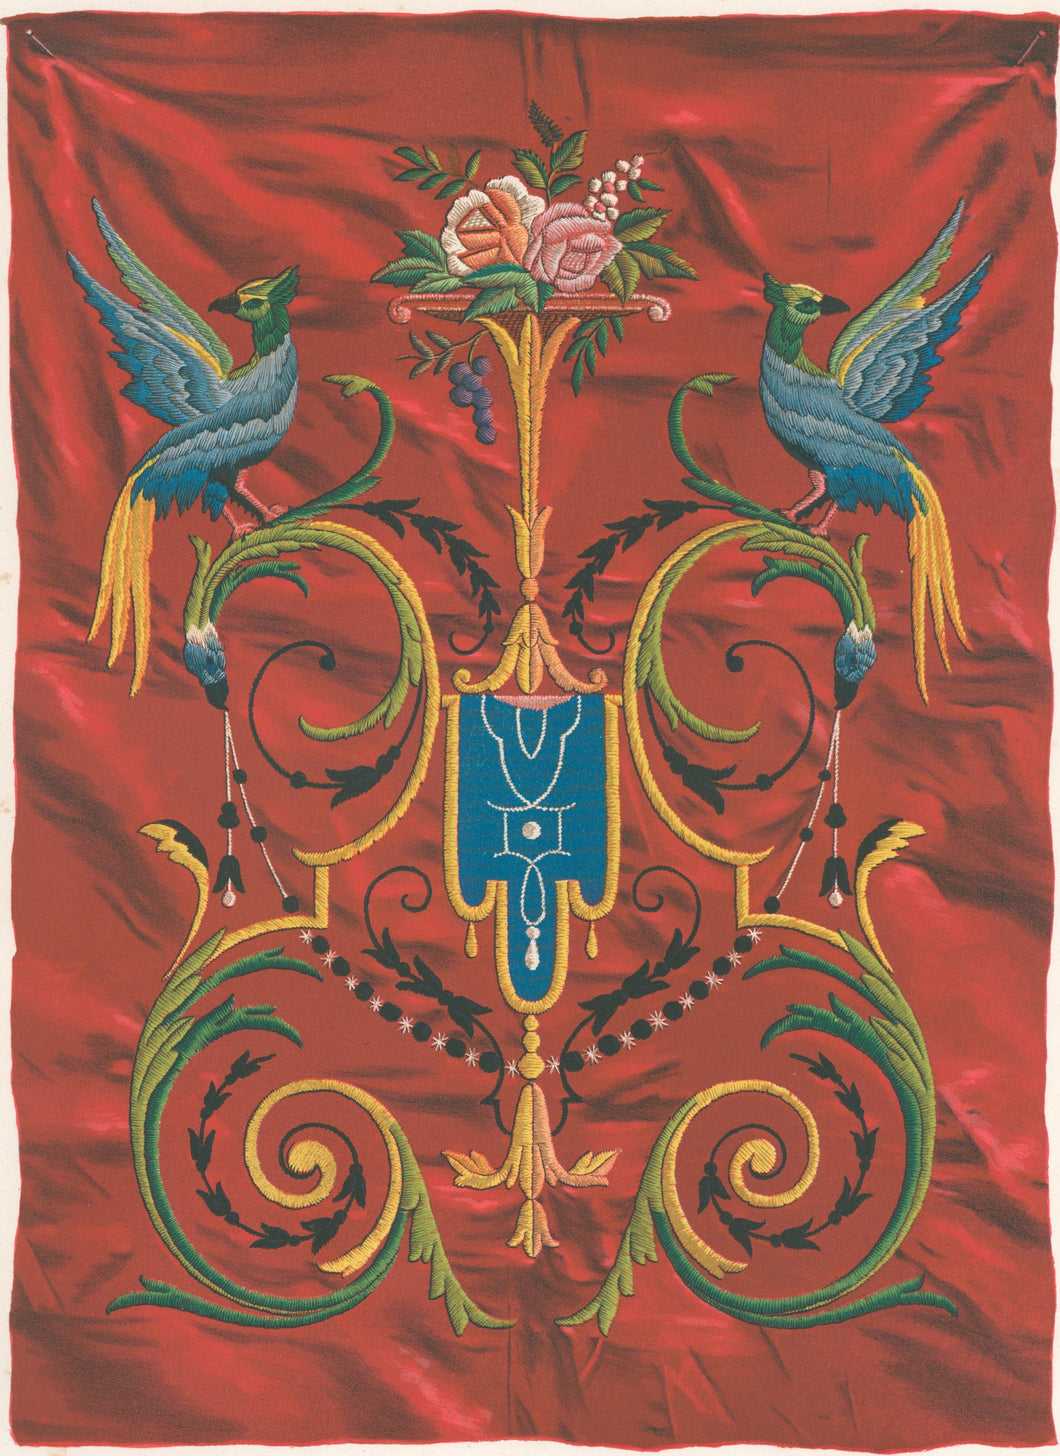 Unattributed “Mechanical Embroideries in Color.  B. Rittmeyer & Co. Switzerland”